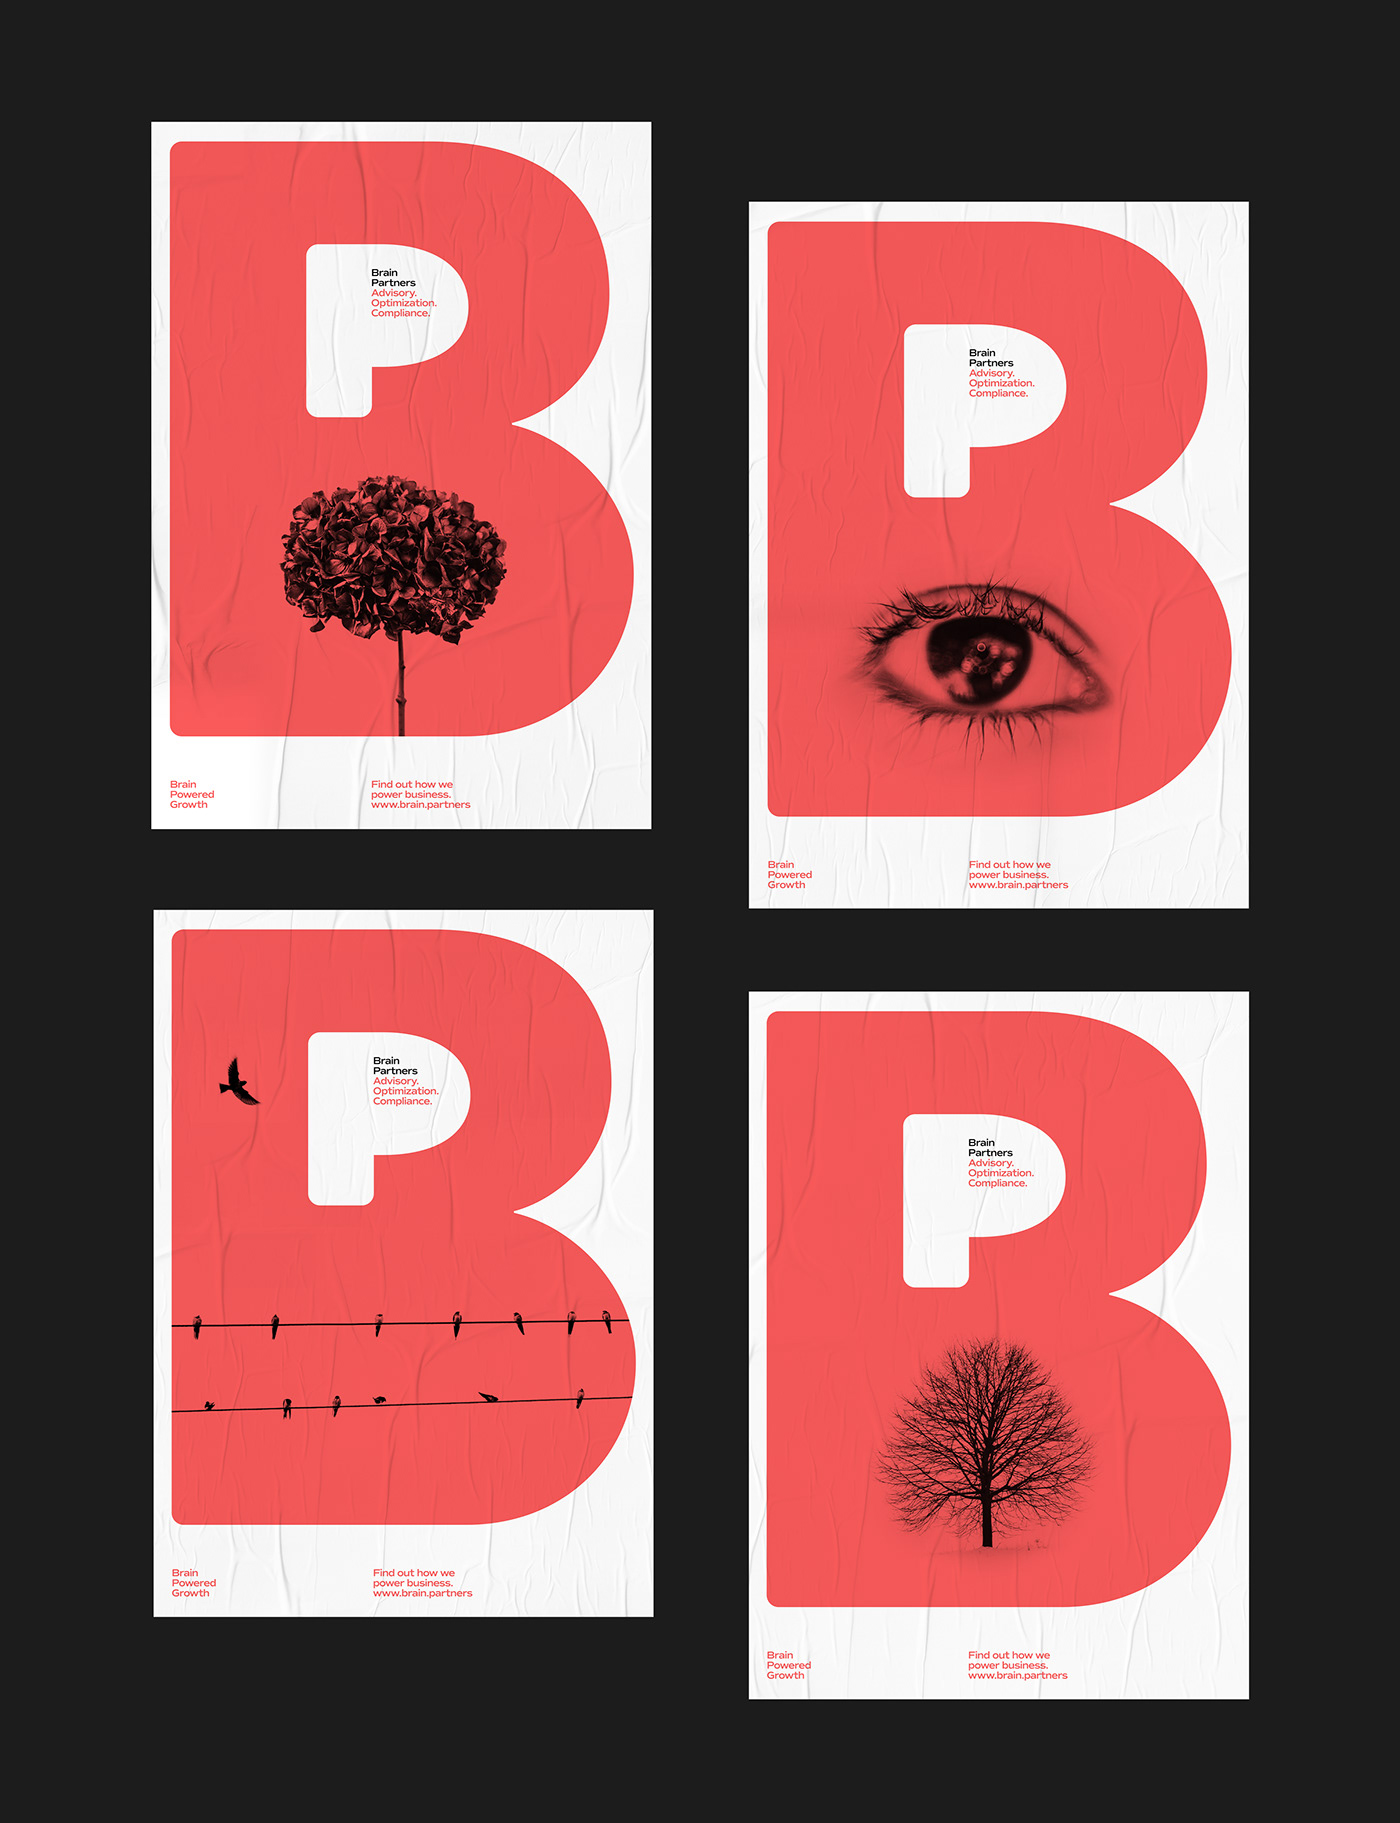 Posters inspired by Josef Müller-Brockmann. The red logo icon overlays black and white photos.